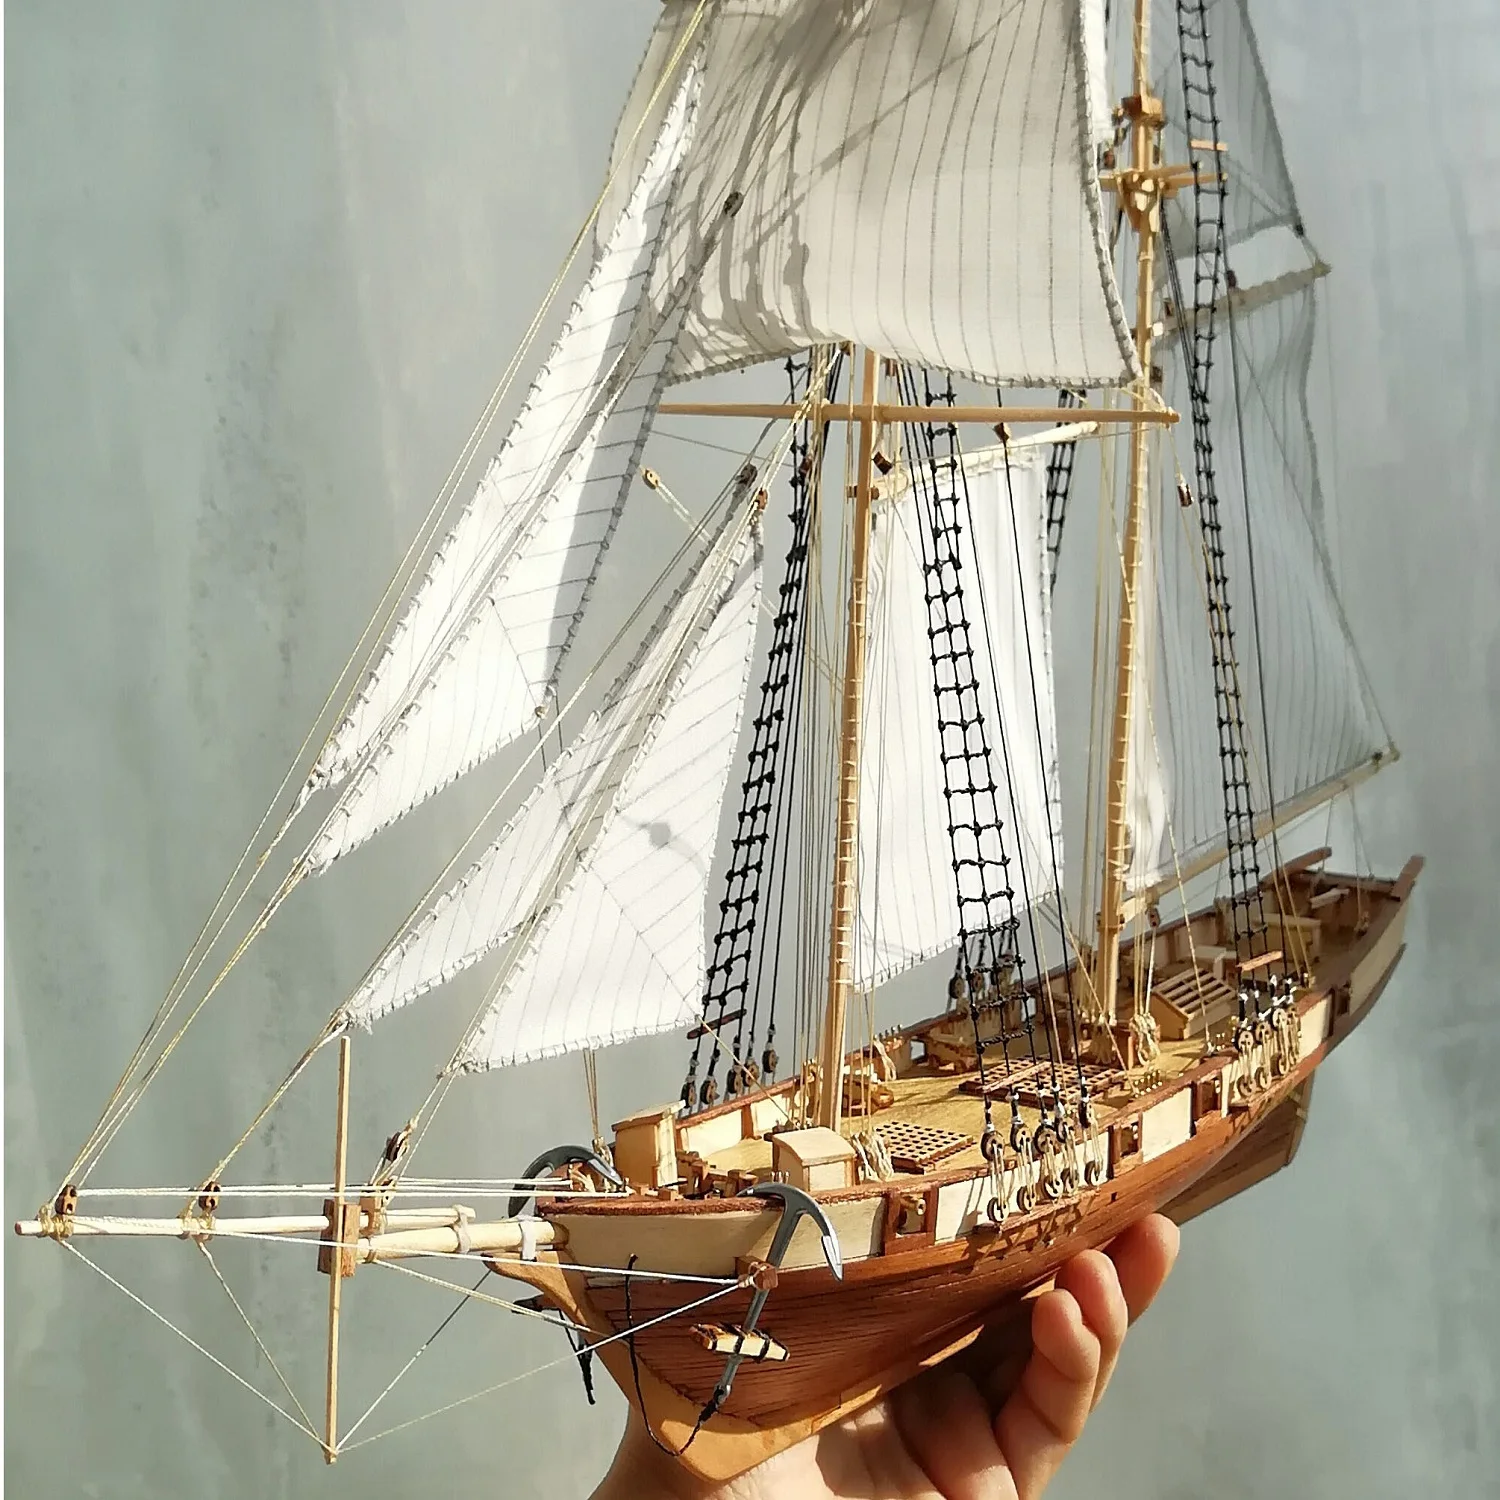 Latest Edition: 1/96 Scale Classics Ancient Ship Wooden Model Building Kits - Harvey 1847 Wooden Sailboat DIY for Home Decorations"